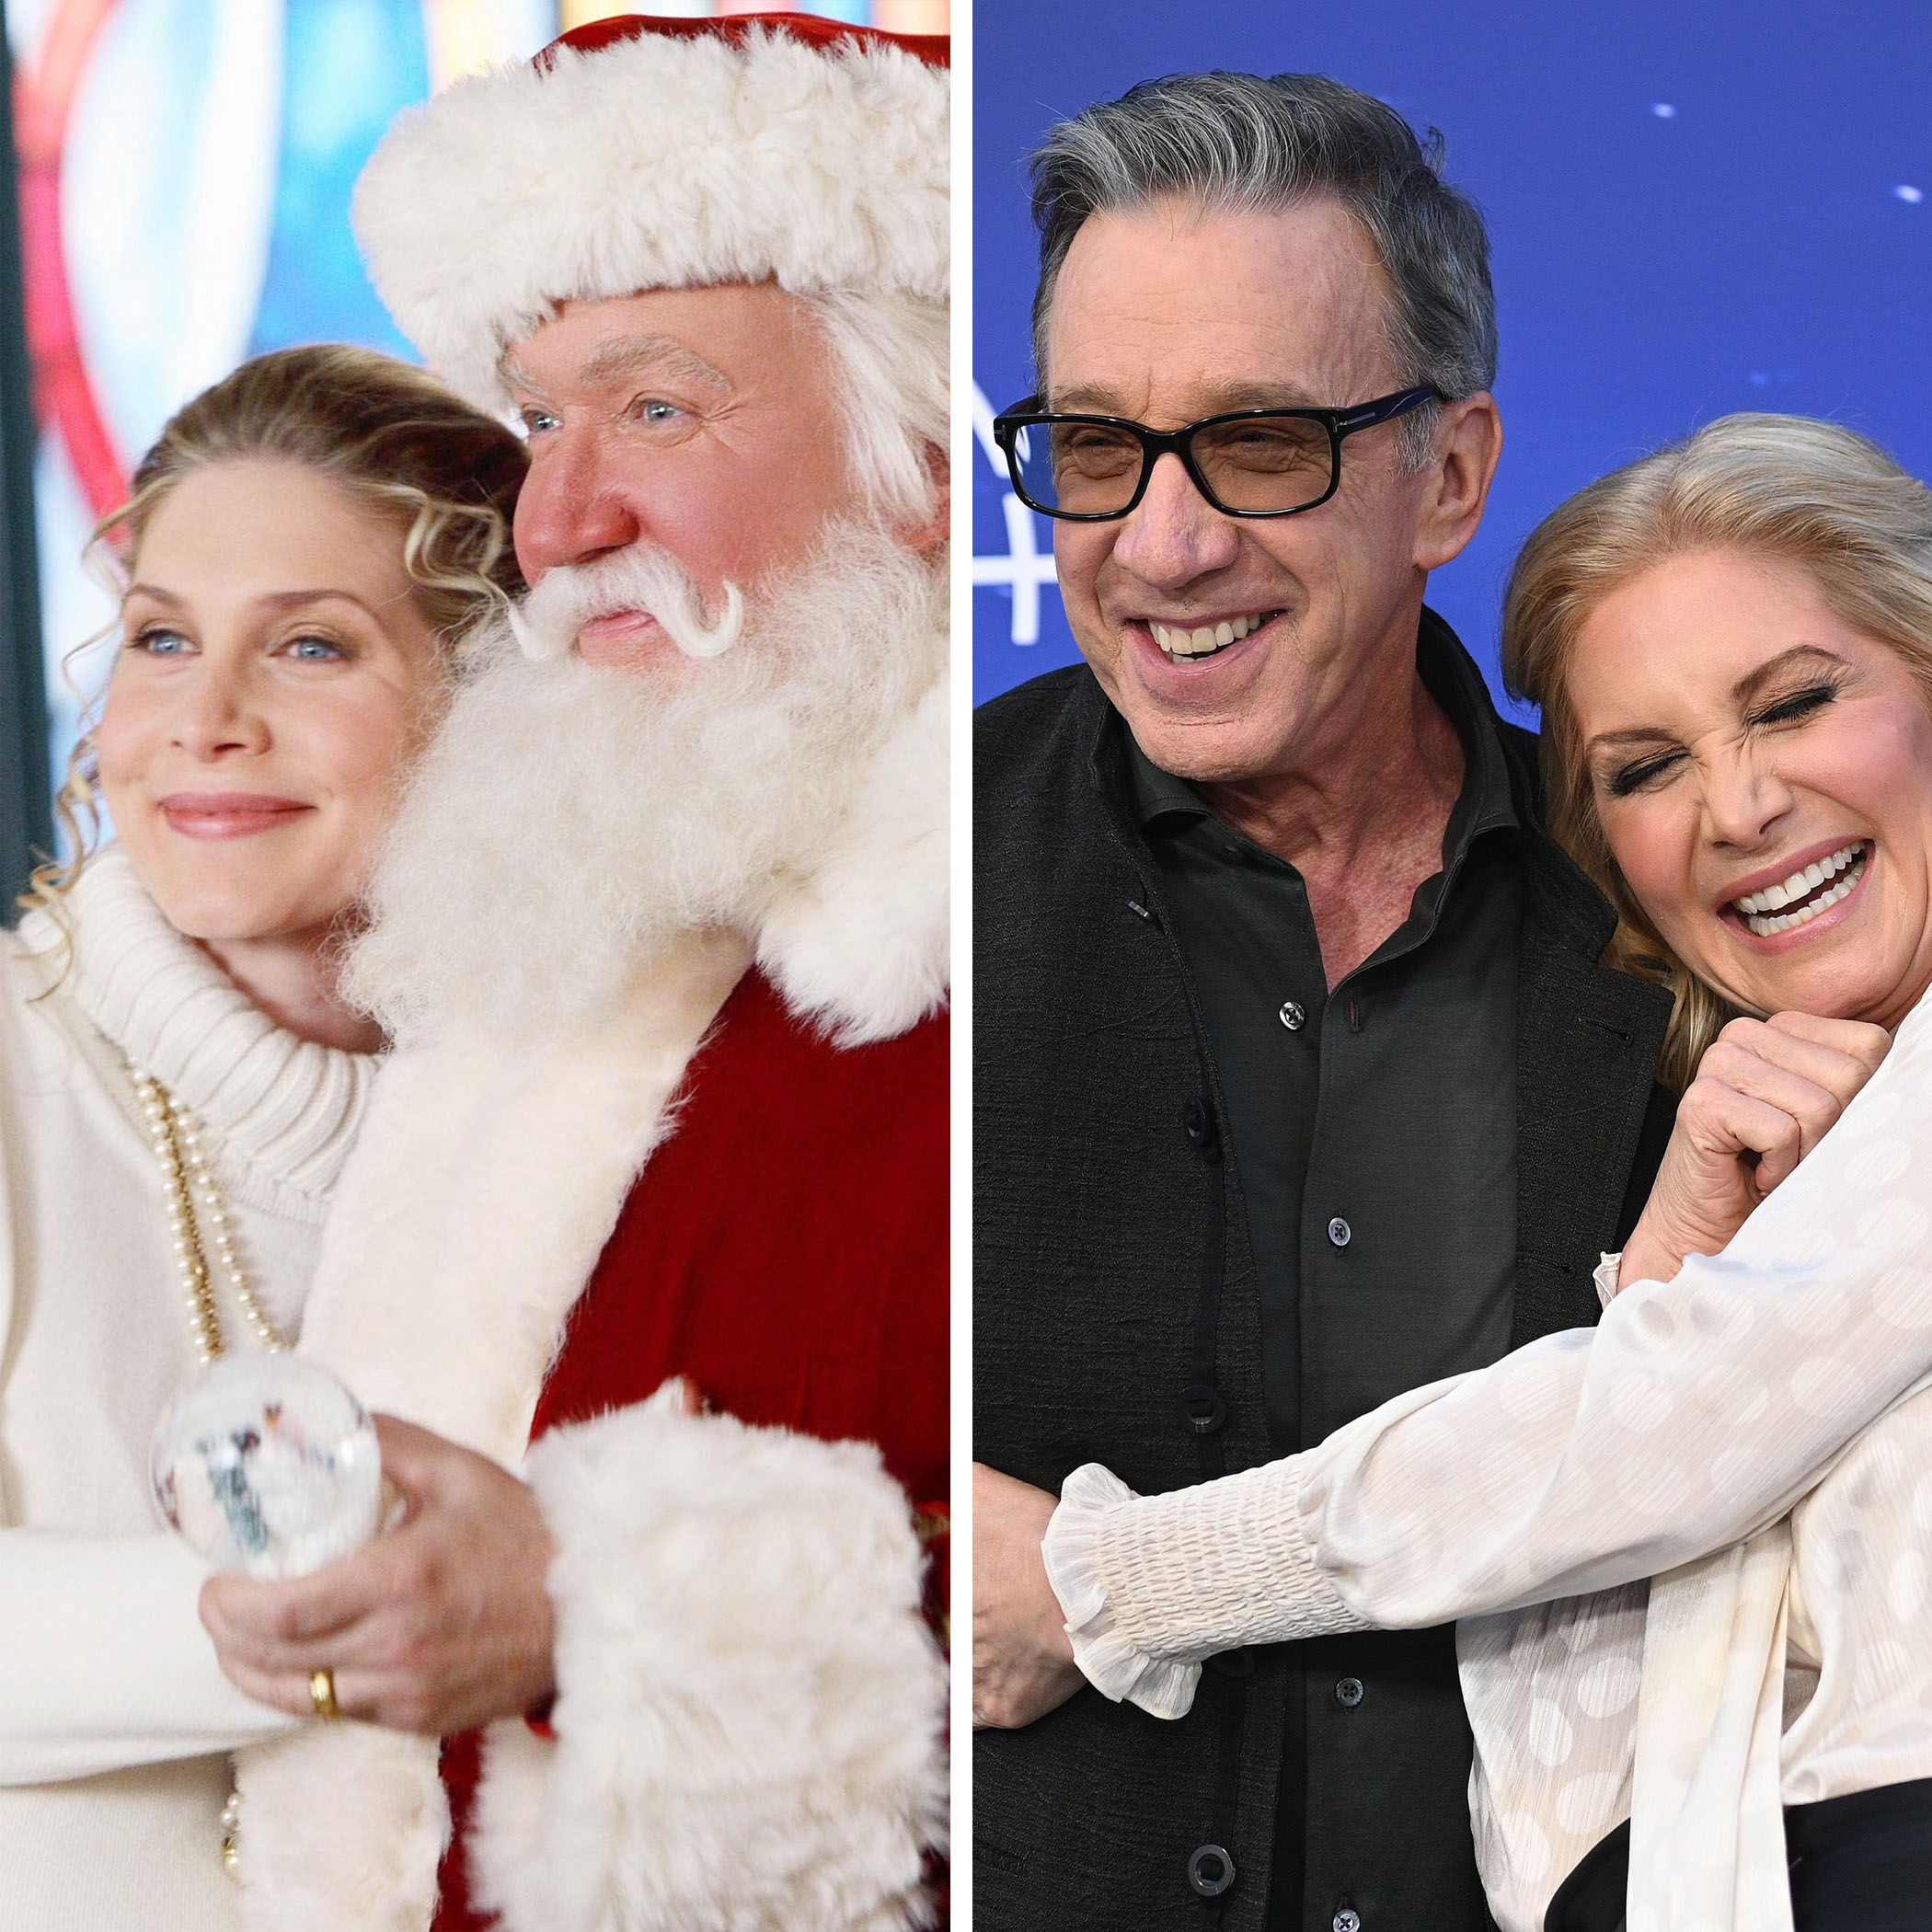 The Santa Clause Cast Where Are They Now?